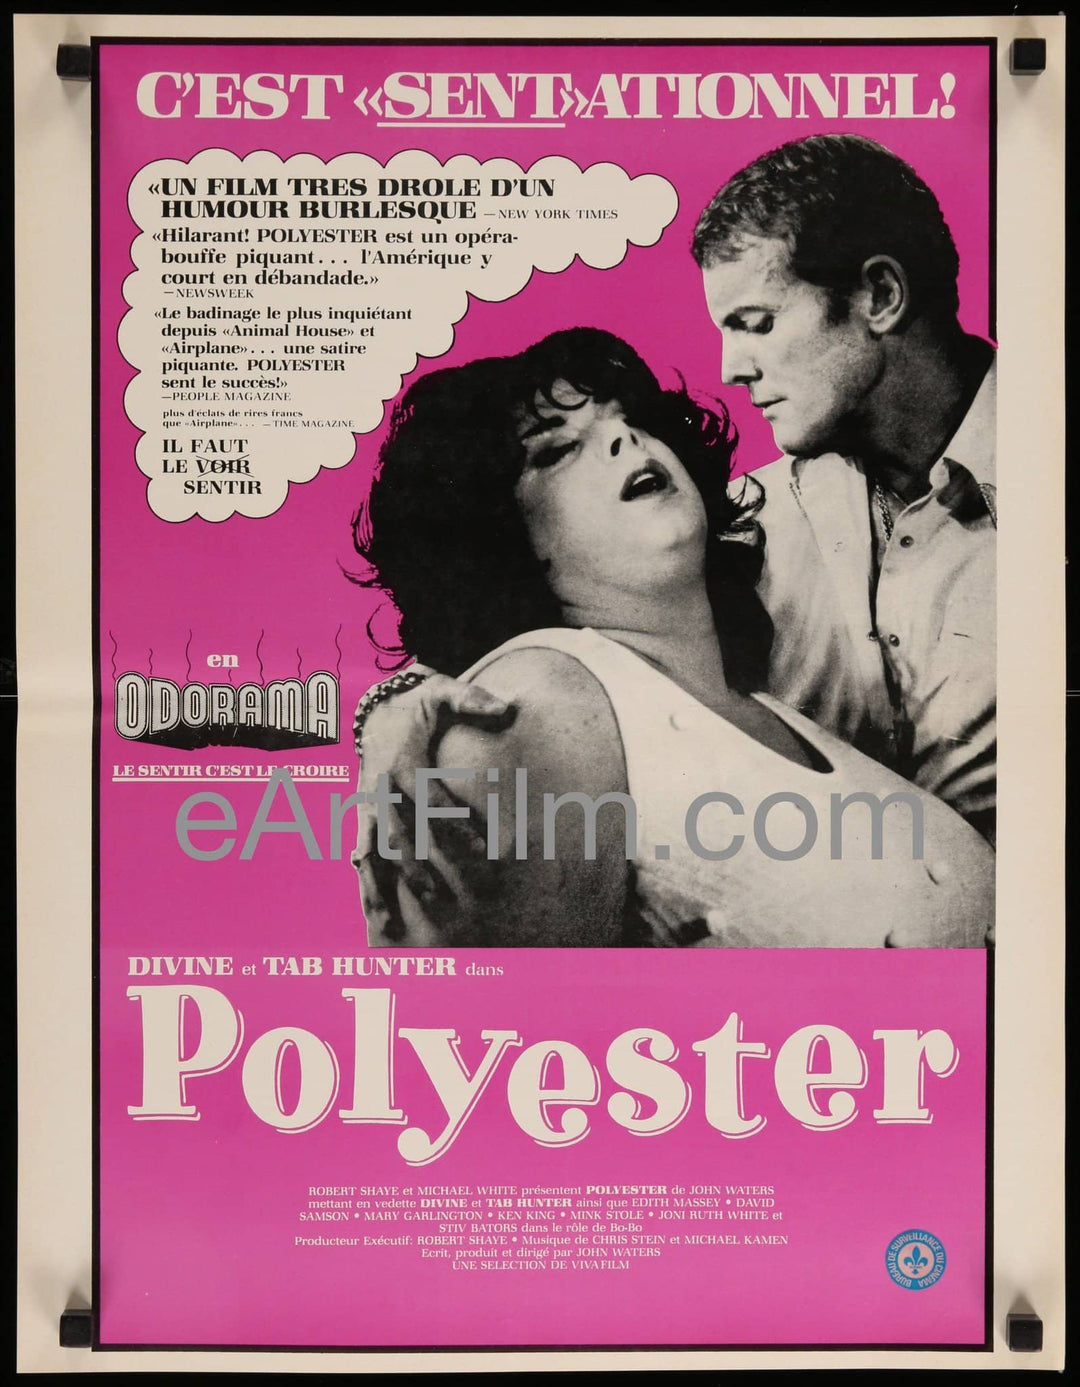 eArtFilm.com Canadian (17"x22") Polyester Movie Poster-Divine-Tab Hunter-Edith Massey-Mink Stole-John Waters-in Odorama